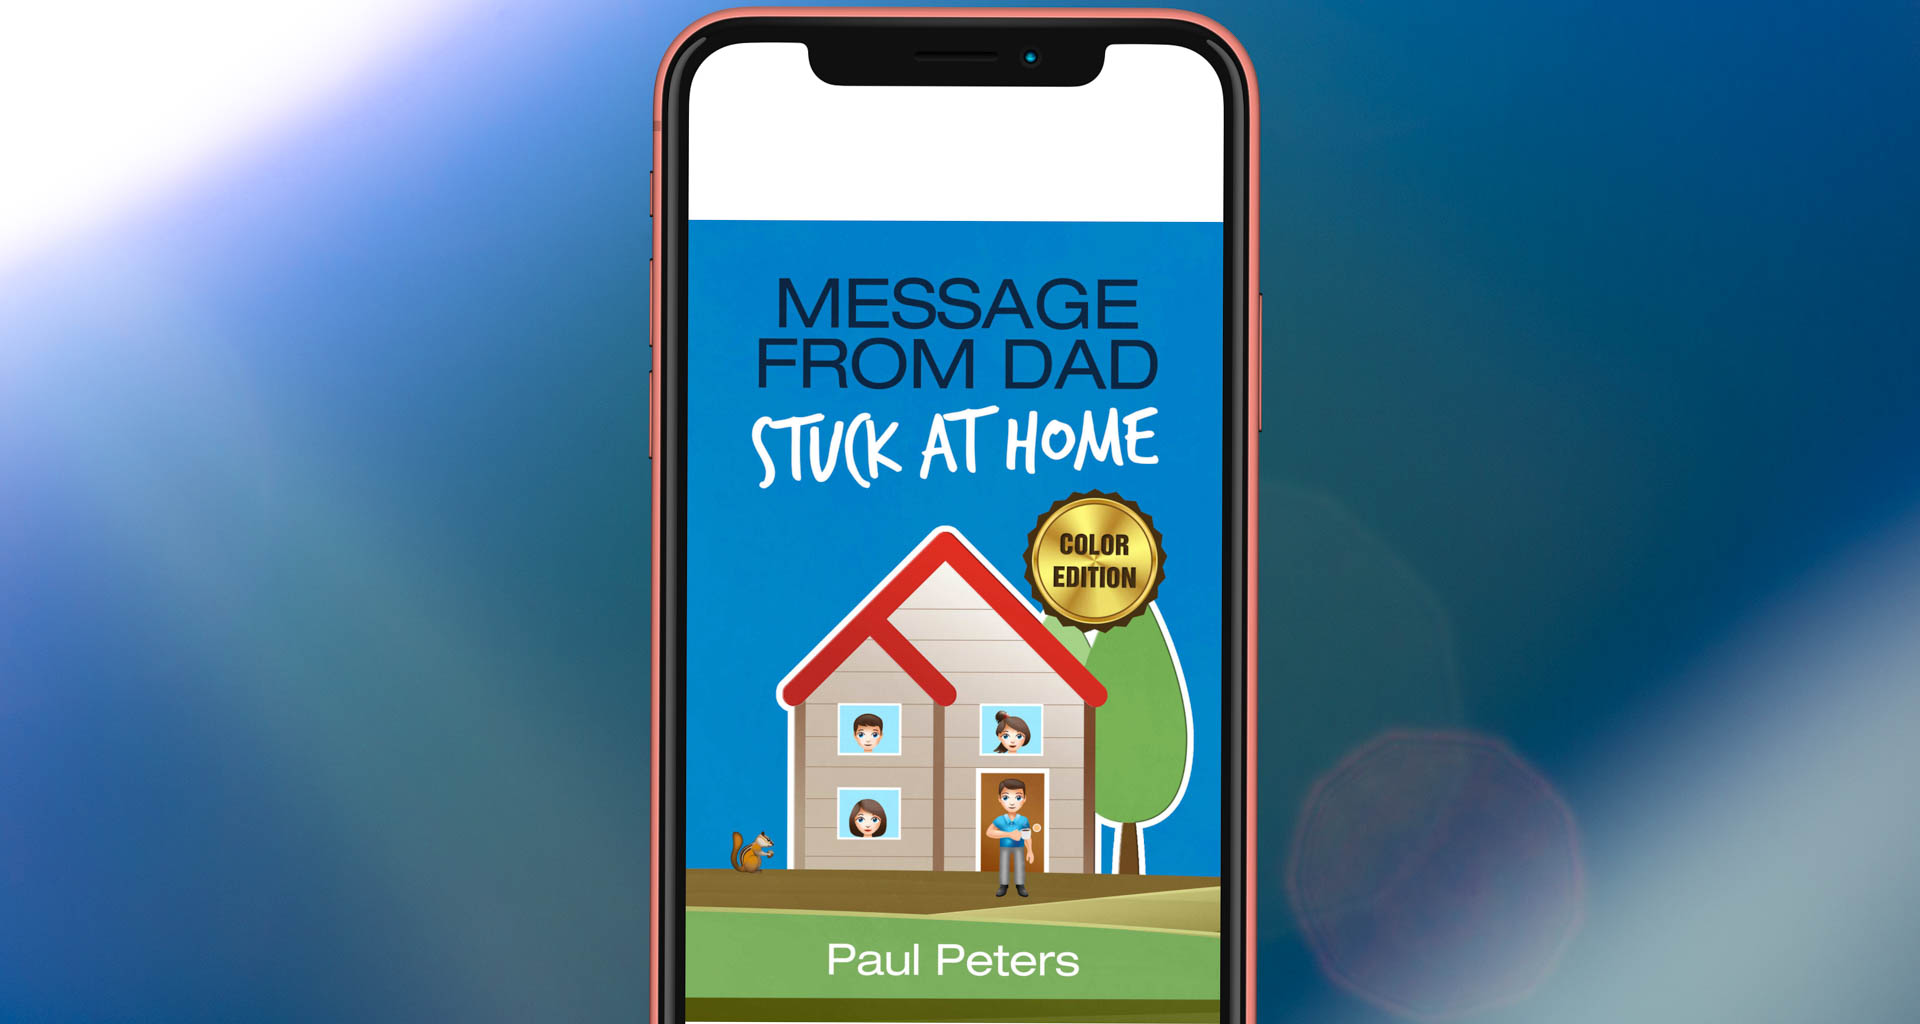 The digital book jacket from the Kindle version of Message From Dad: Stuck at Home. Image: Digitized House.